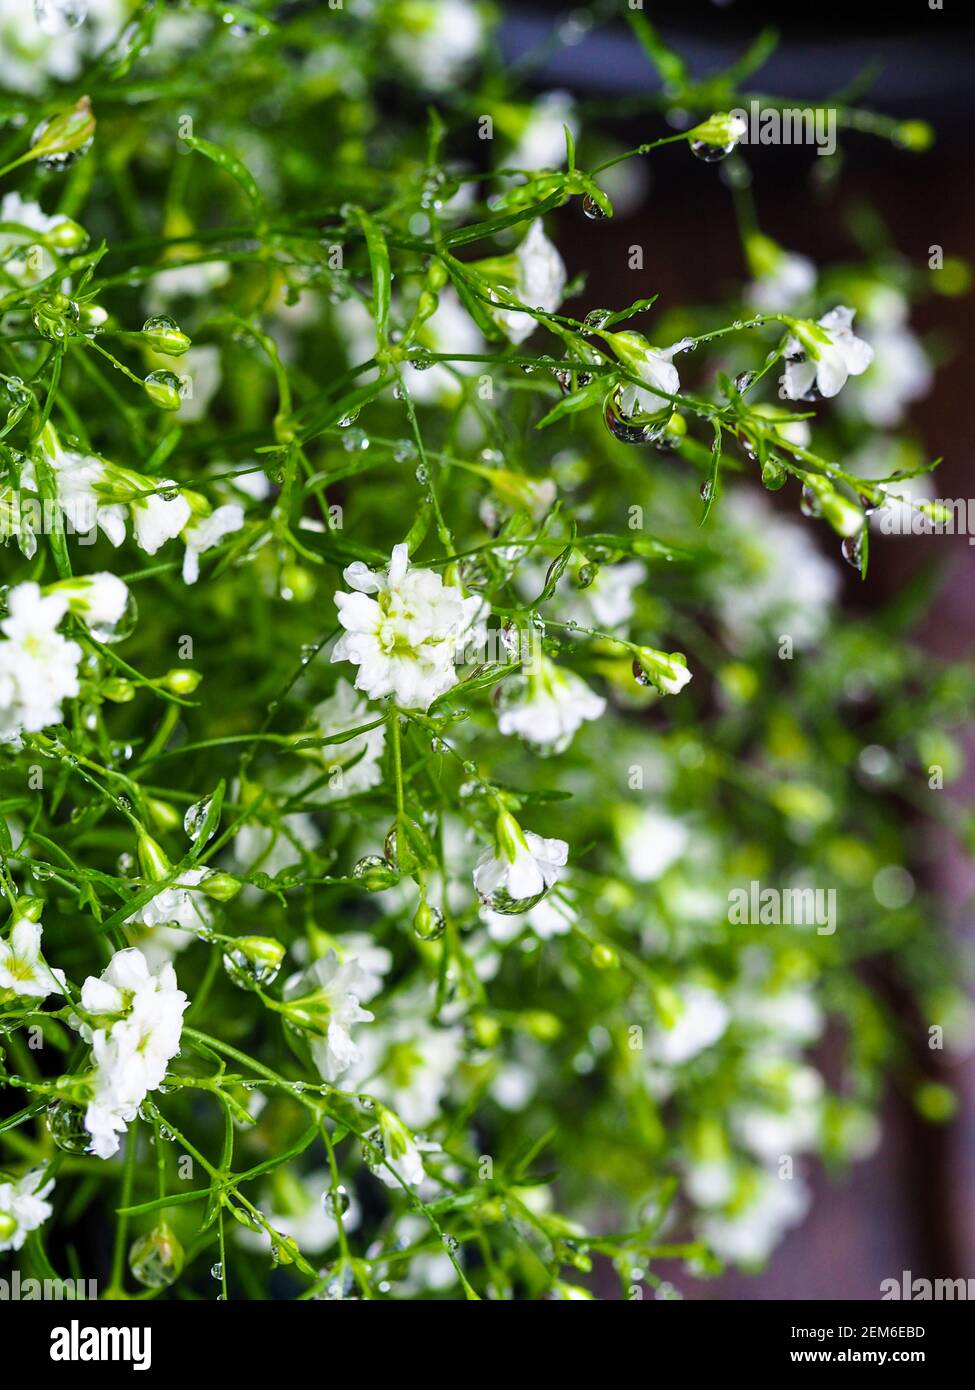 Gypsophila, or Gypsy, delicate tiny white semi-double flowers in Summer on this small compact plant, covered in water droplets Stock Photo